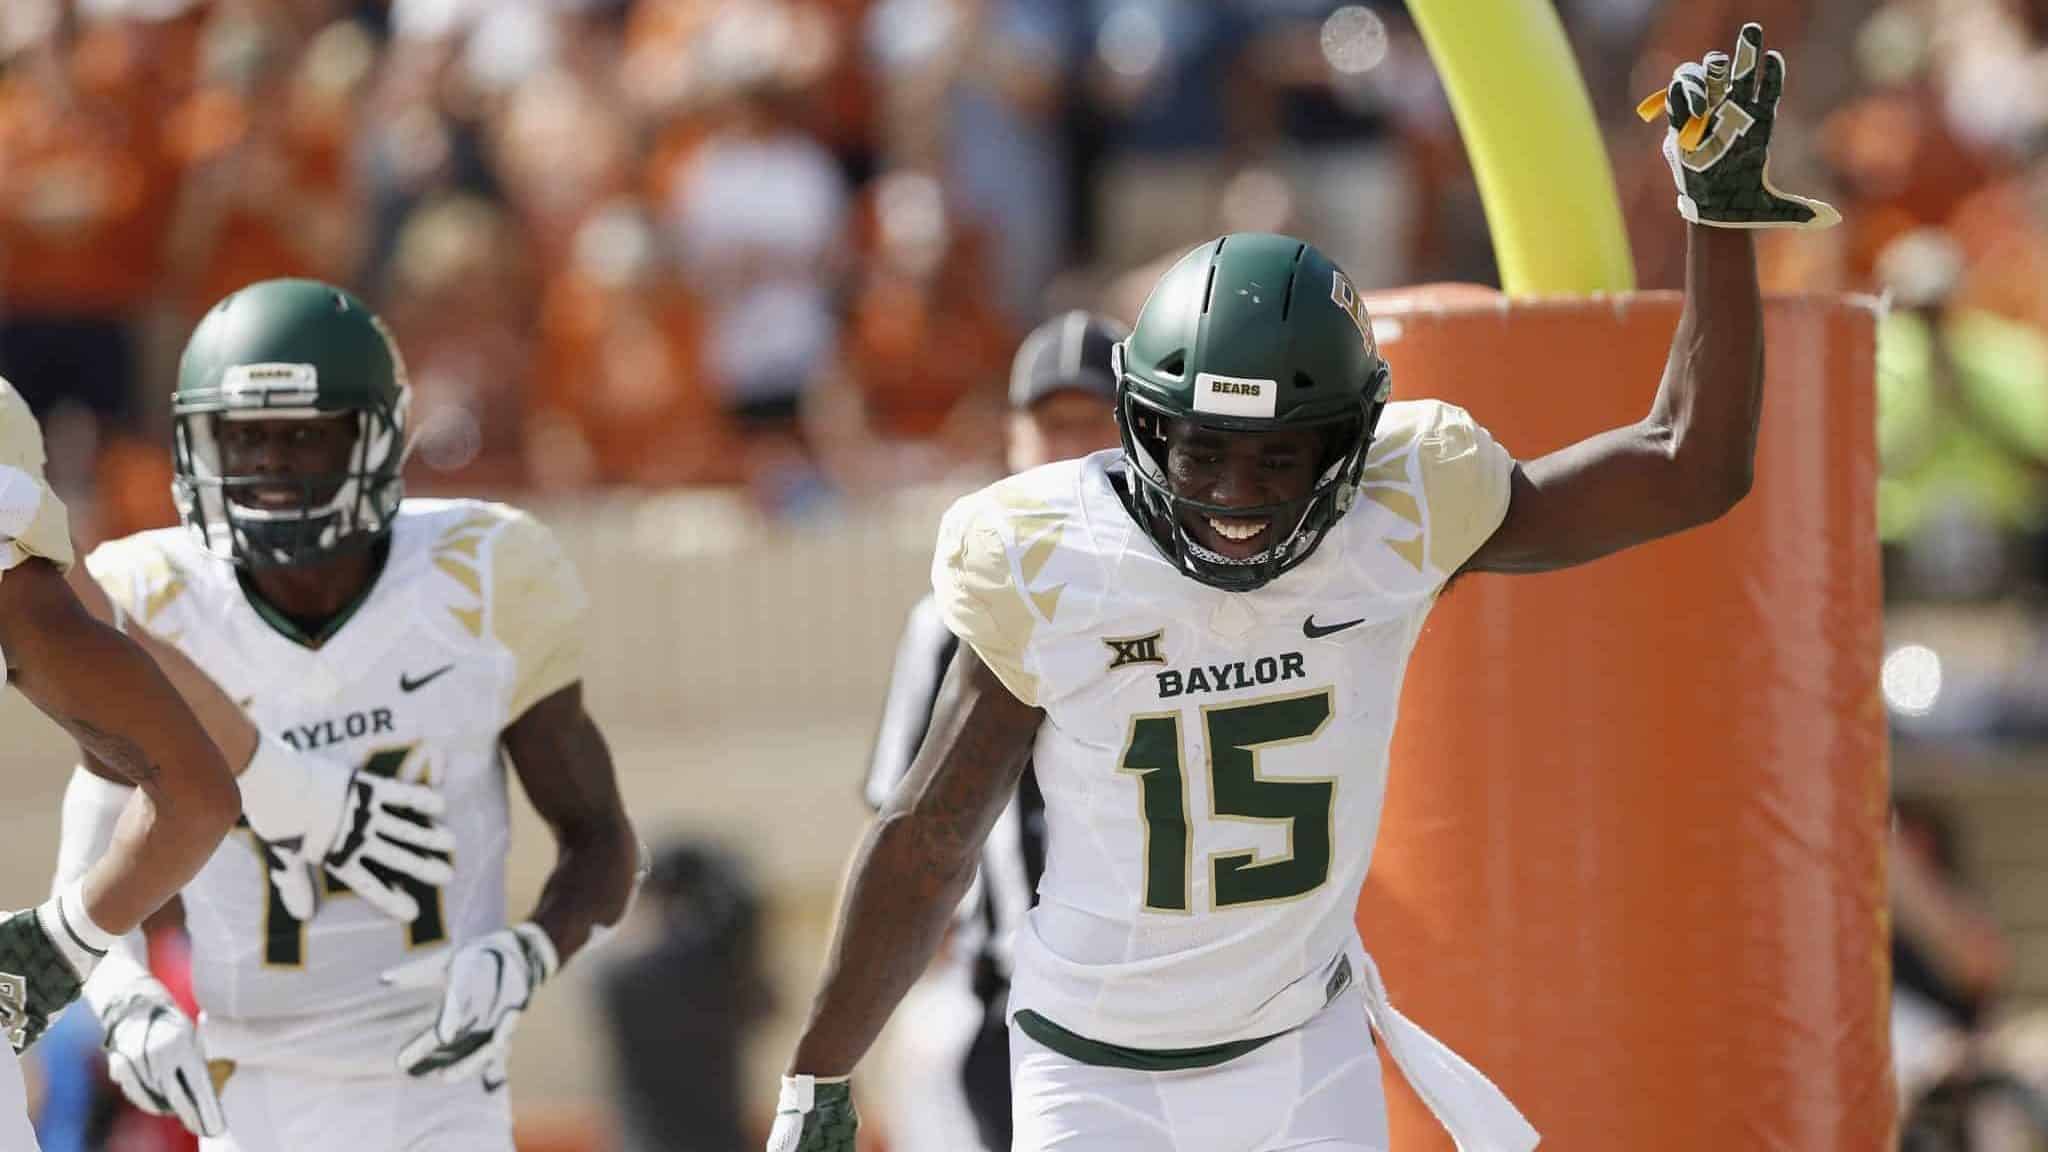 AUSTIN, TX - OCTOBER 13: Denzel Mims #15 of the Baylor Bears celebrates after a touchdown reception in the first half against the Texas Longhorns of the Baylor Bears at Darrell K Royal-Texas Memorial Stadium on October 13, 2018 in Austin, Texas.